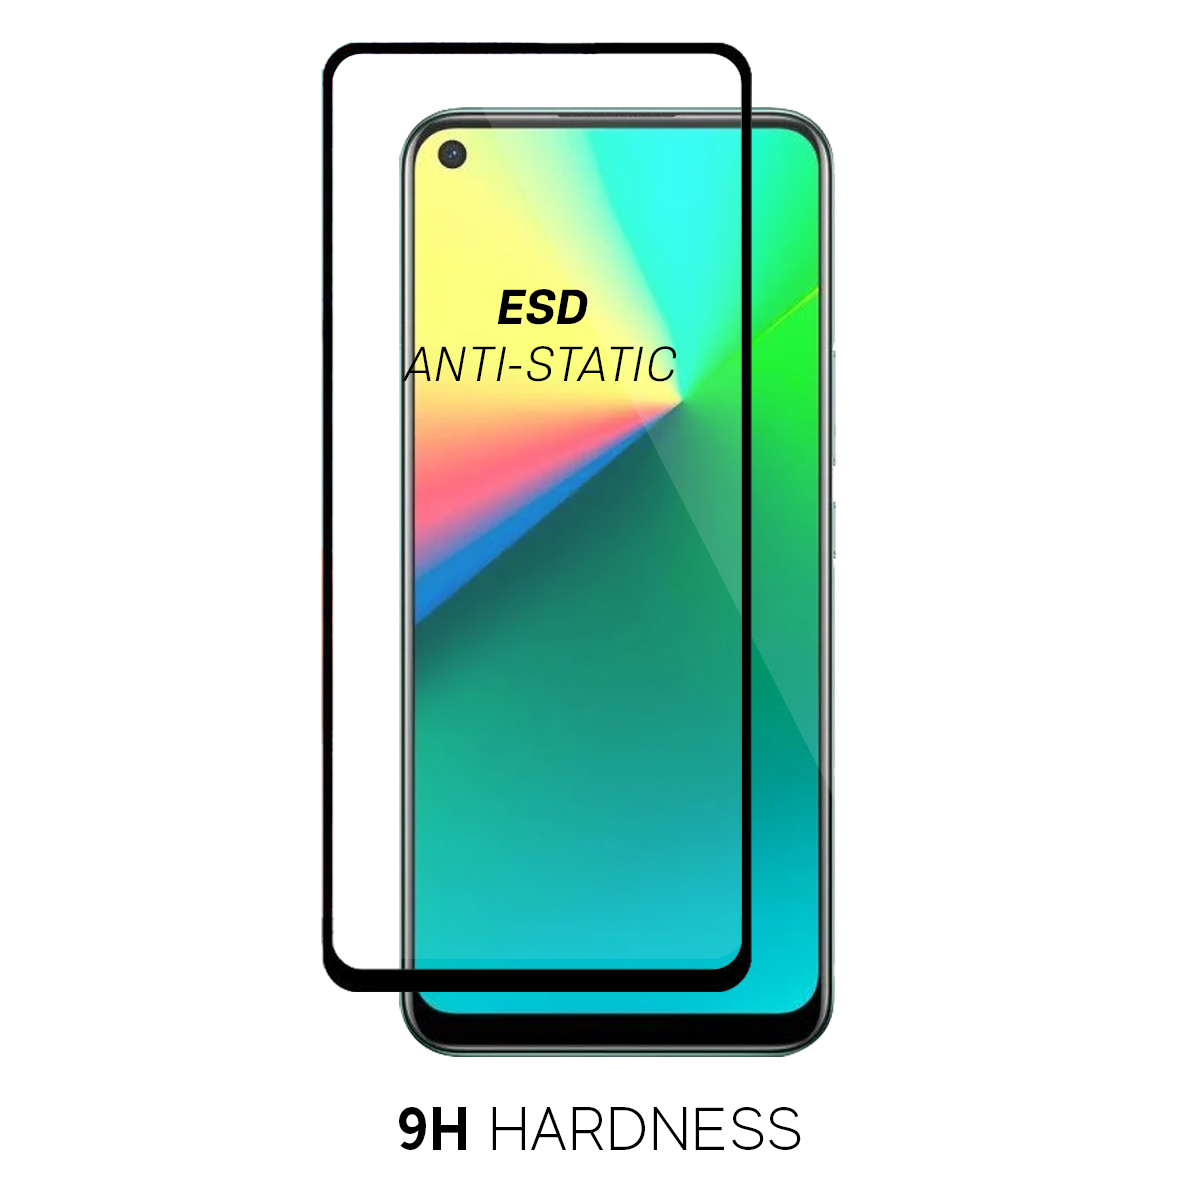 Beyox ESD Anti Static 5D Glass for Oppo A11K